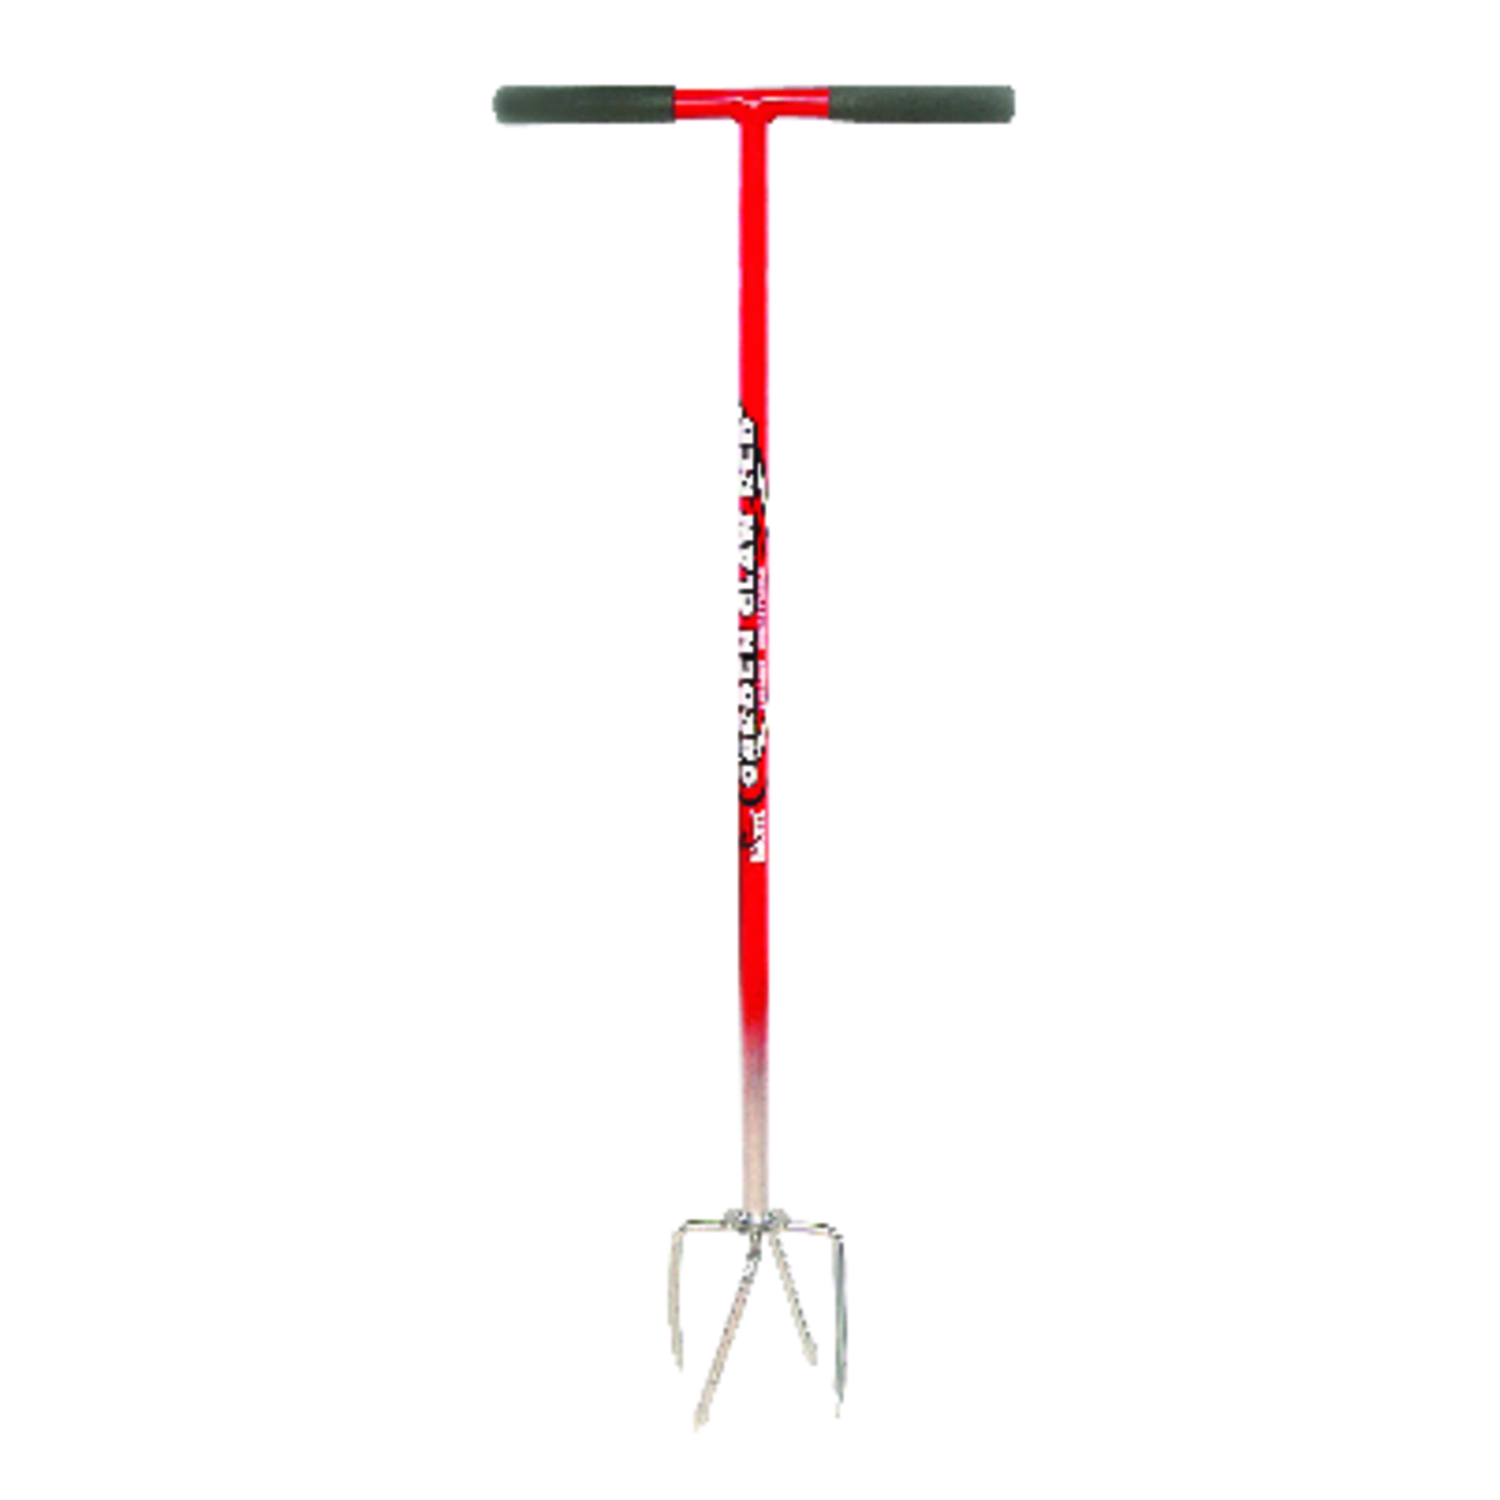 Lawn Garden Tools At Ace Hardware